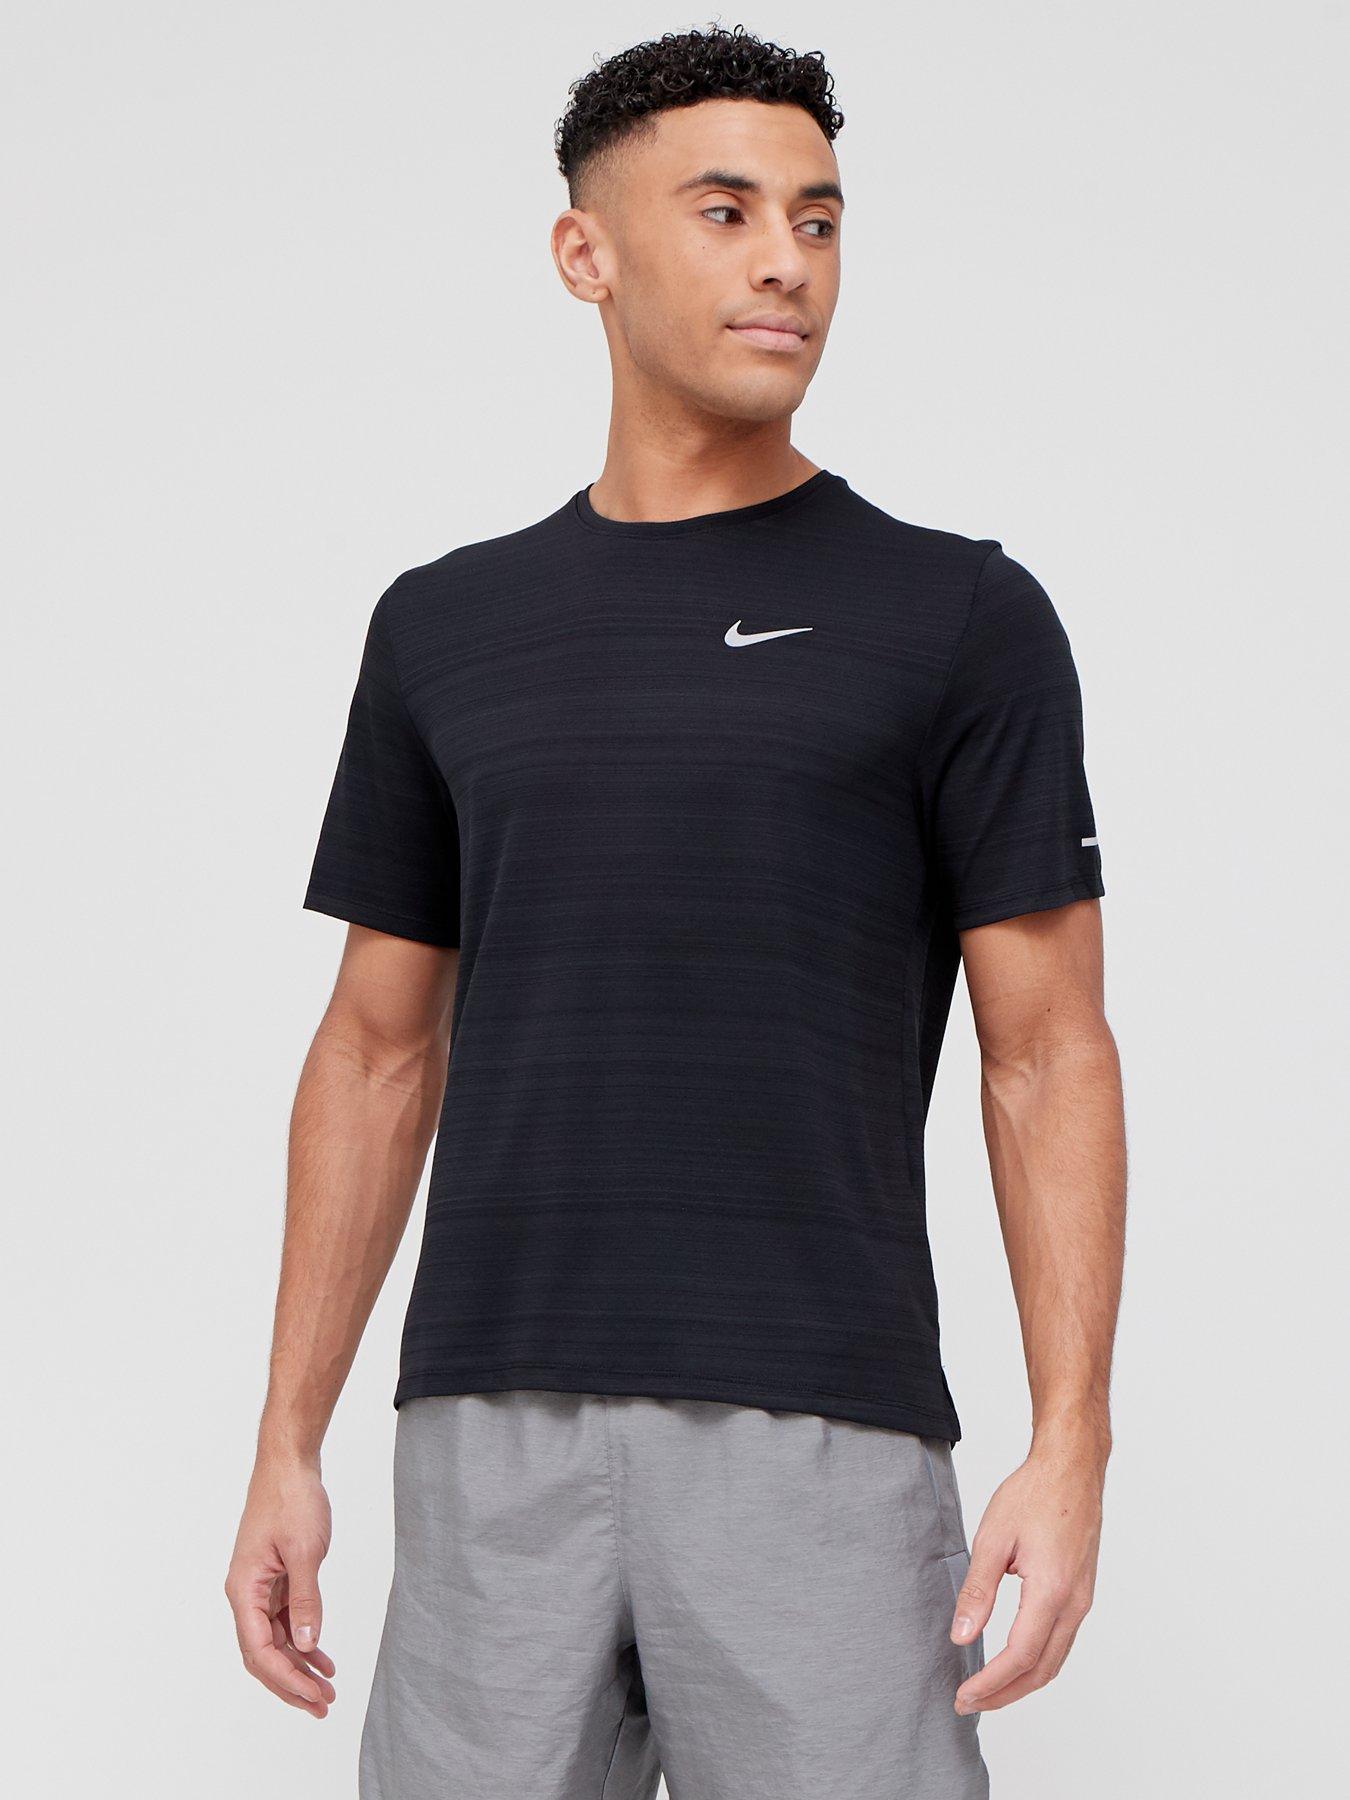 Running | Mens sports clothing Sports & leisure | Nike www.very.co.uk